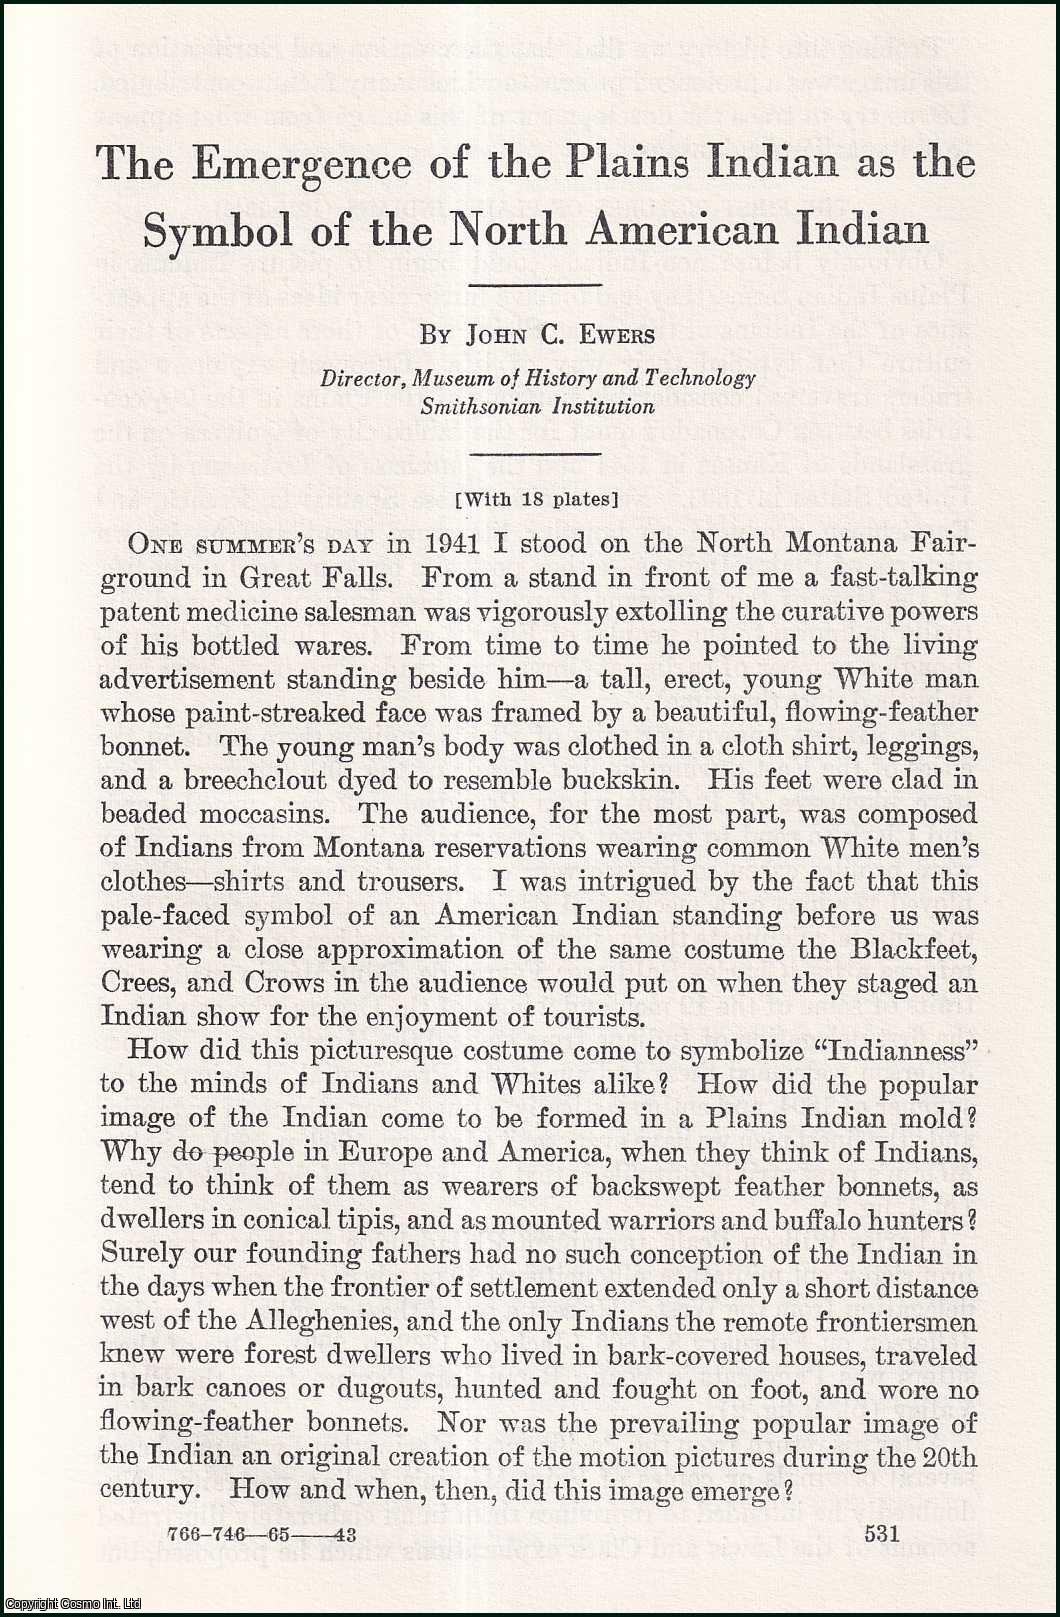 John C. Ewers, Director, Museum of History & Technology Smithsonian Institution. - The Emergence of the Plains Indian as the Symbol of the North American Indian. An uncommon original article from the Report of the Smithsonian Institution, 1964.